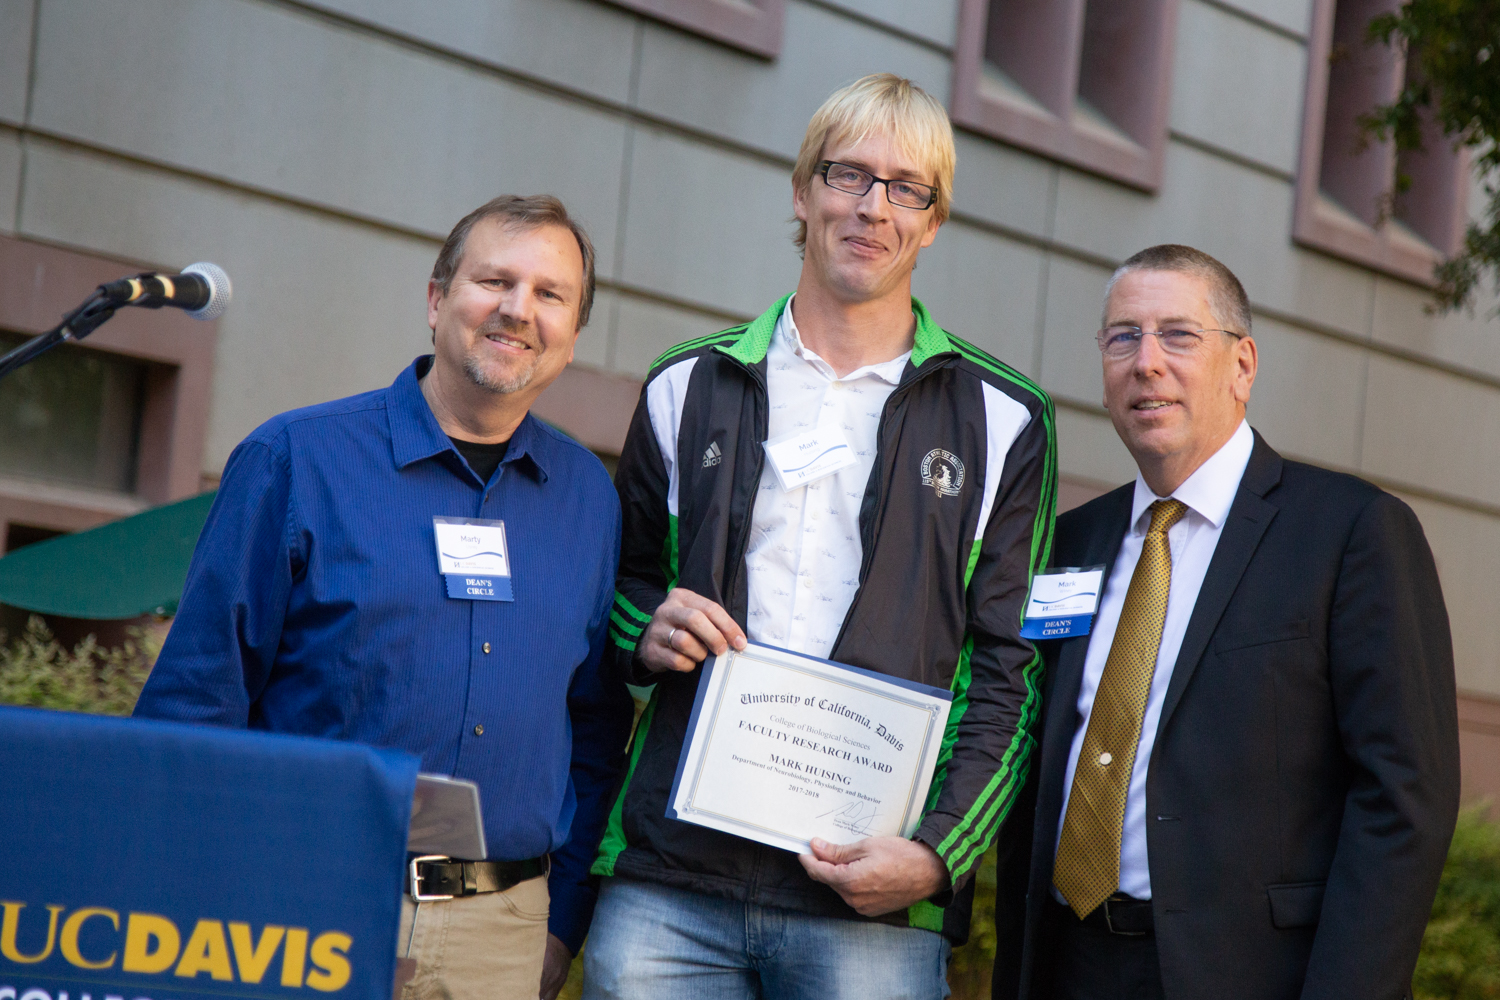 Mark Huising poses with research award